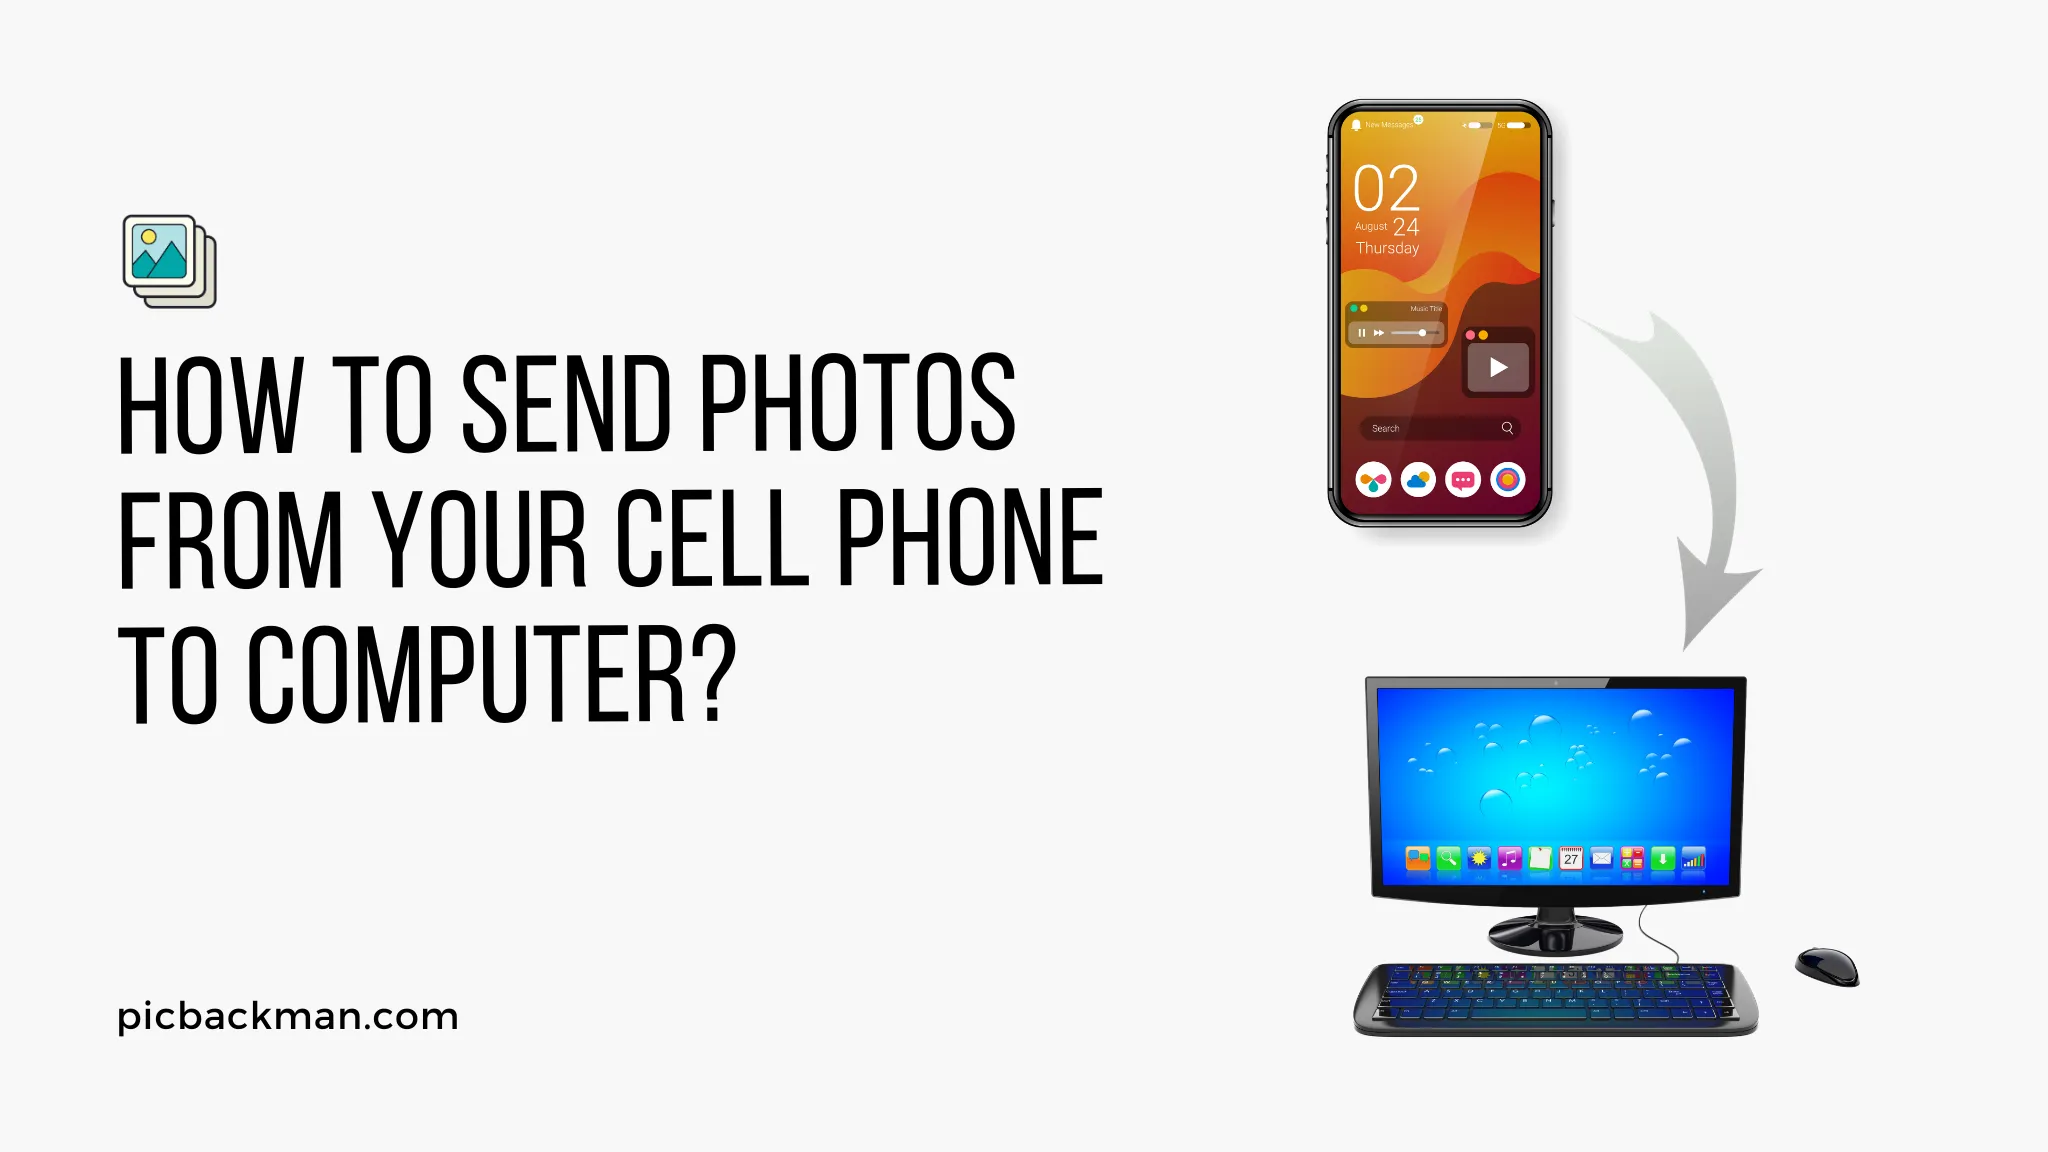 How to Send Photos from Your Cell Phone to Computer?